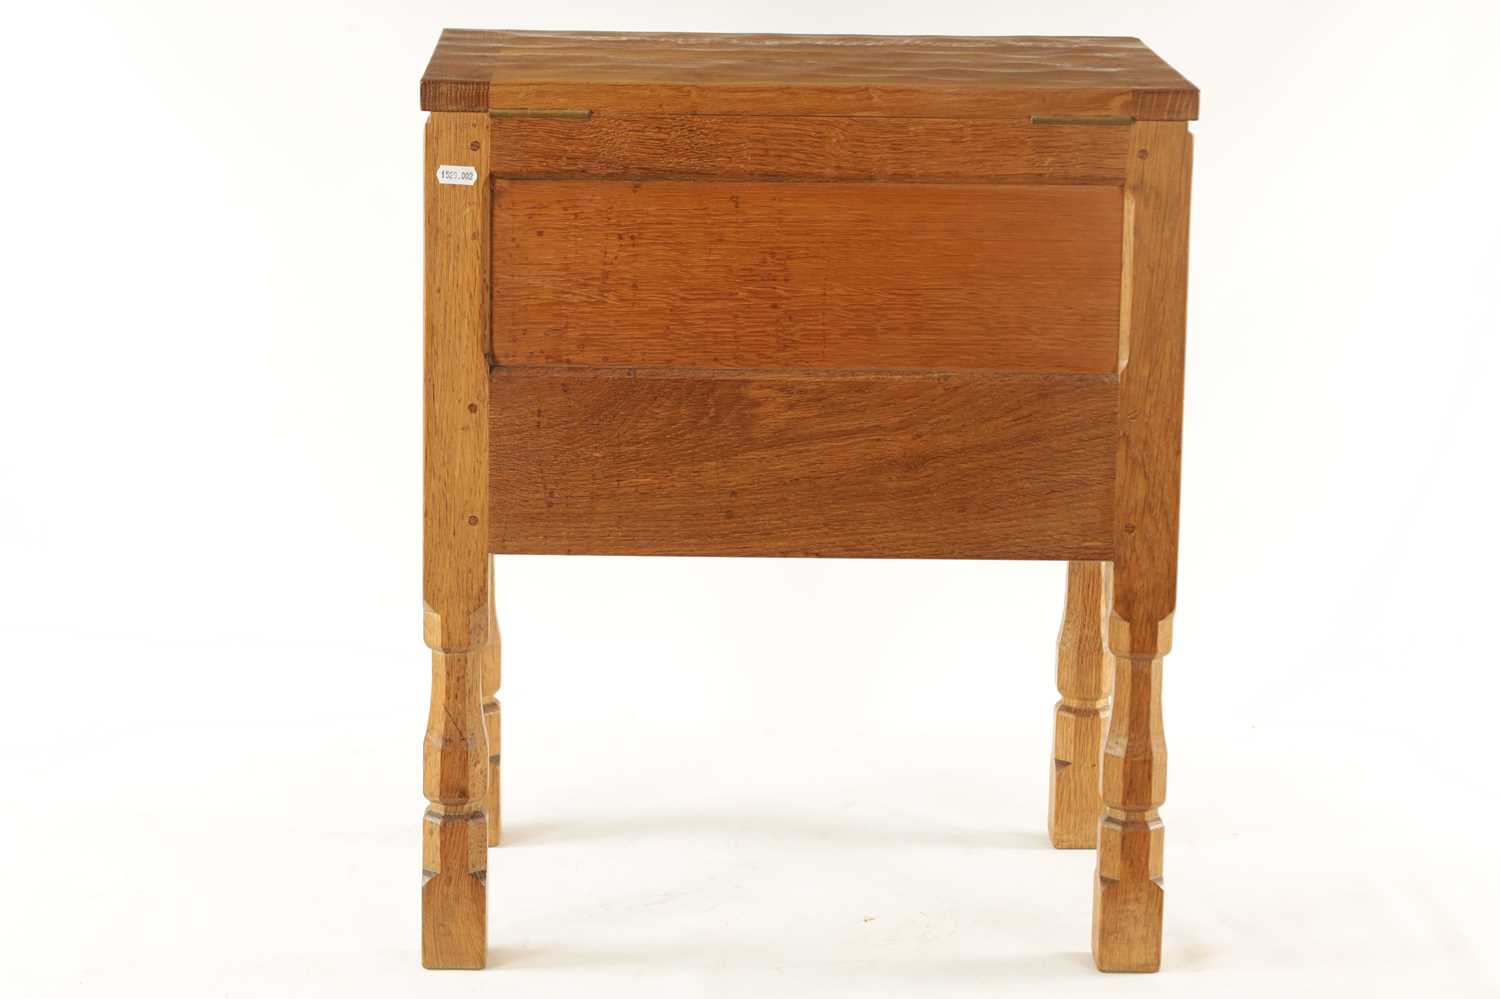 A ROBERT 'MOUSEMAN' THOMPSON JOINED ADZED LIGHT OAK SEWING BOX/SIDE CABINET - Image 8 of 11